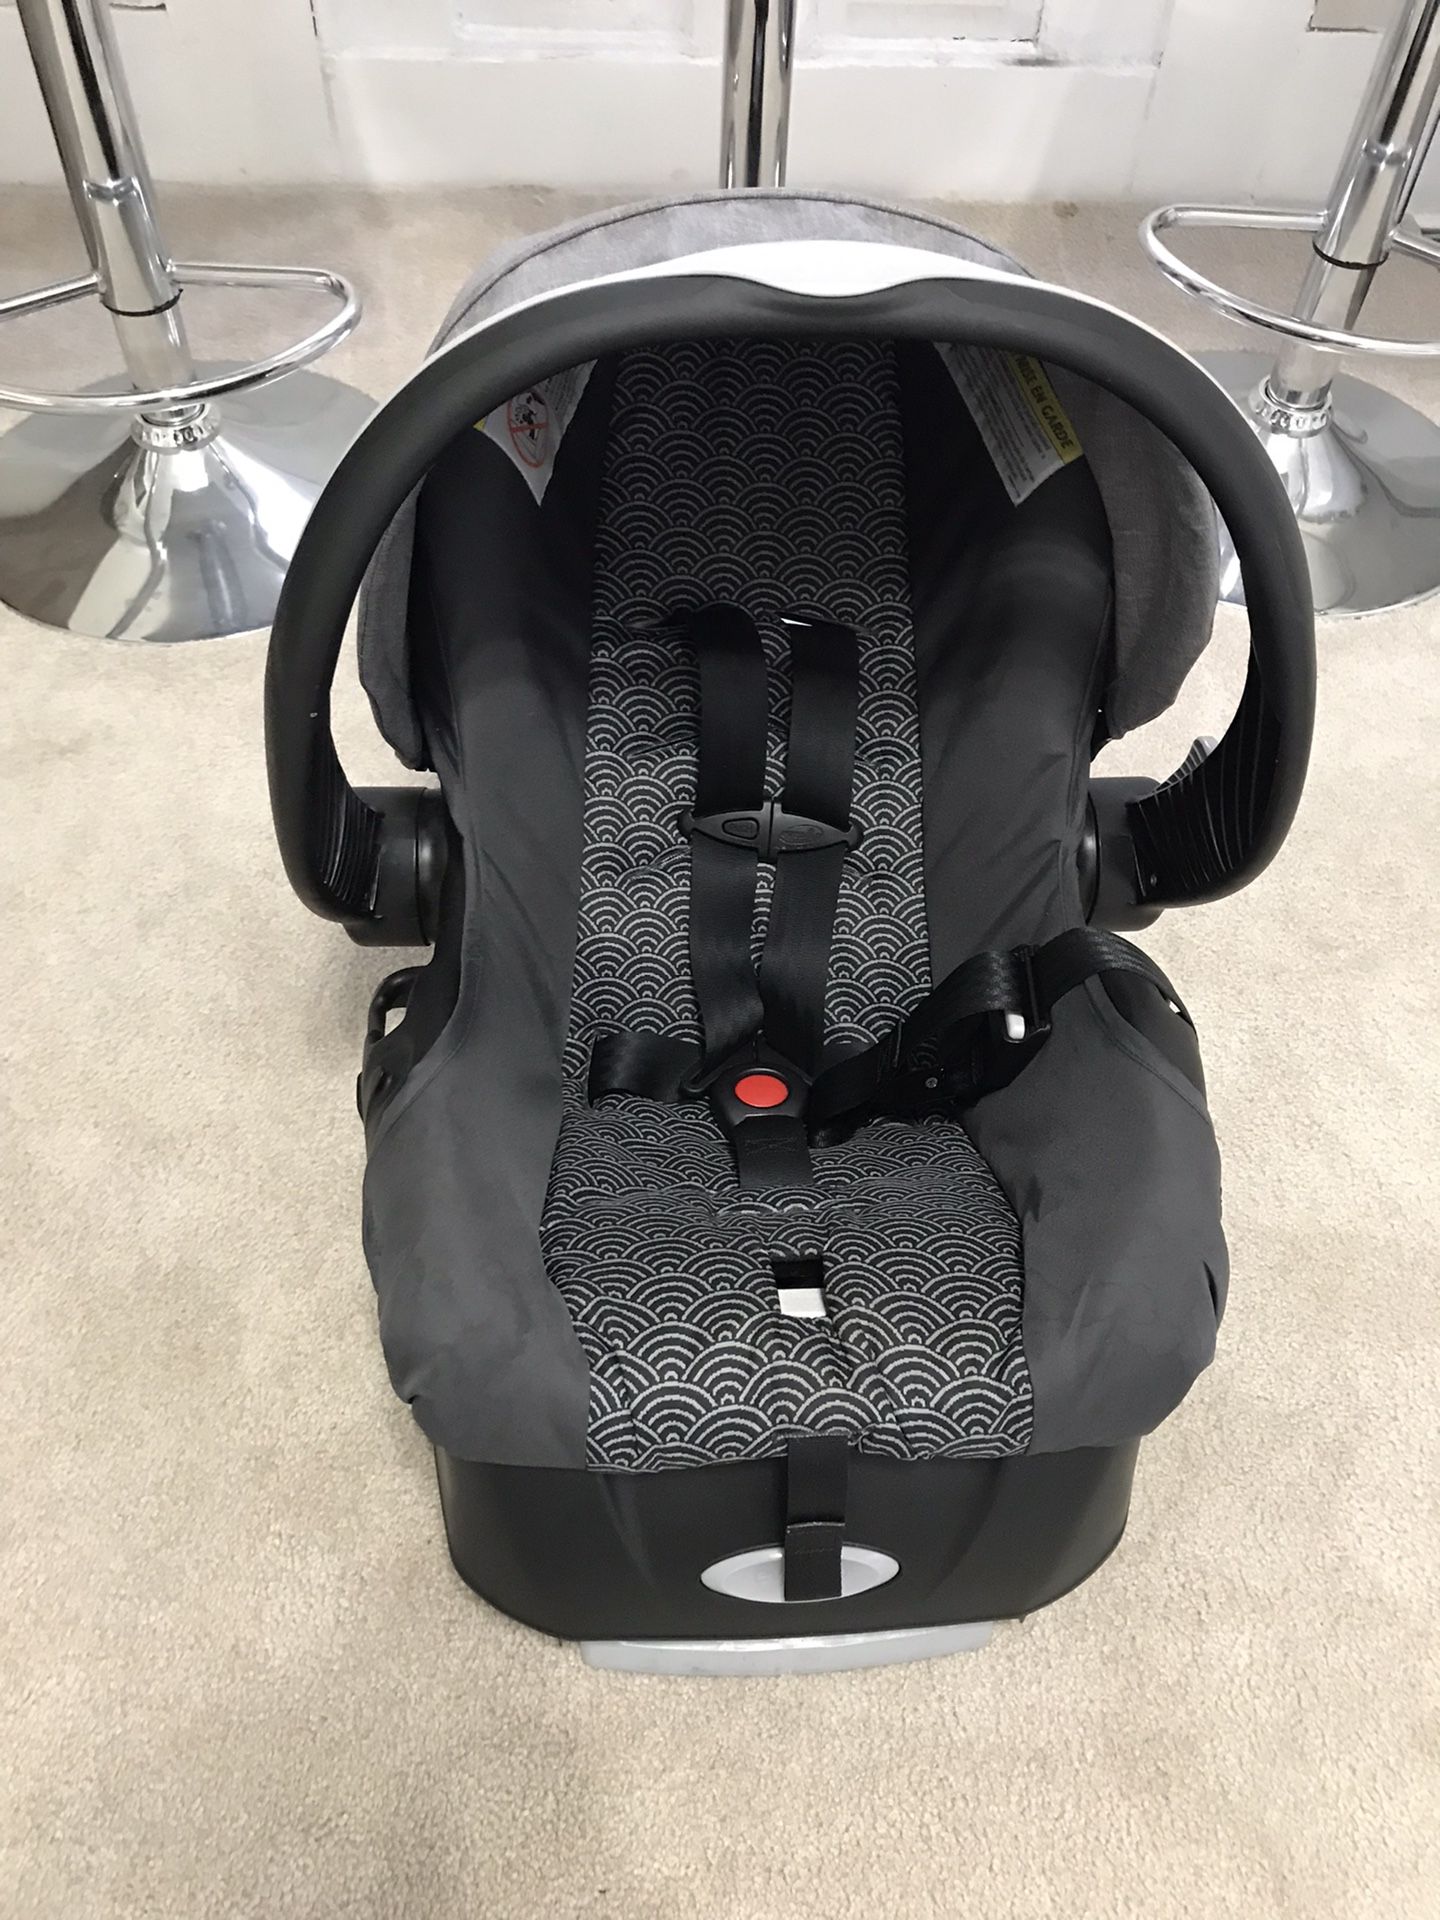 Evenflo Infant Car Seat and Car Seat Base - Expires 2025